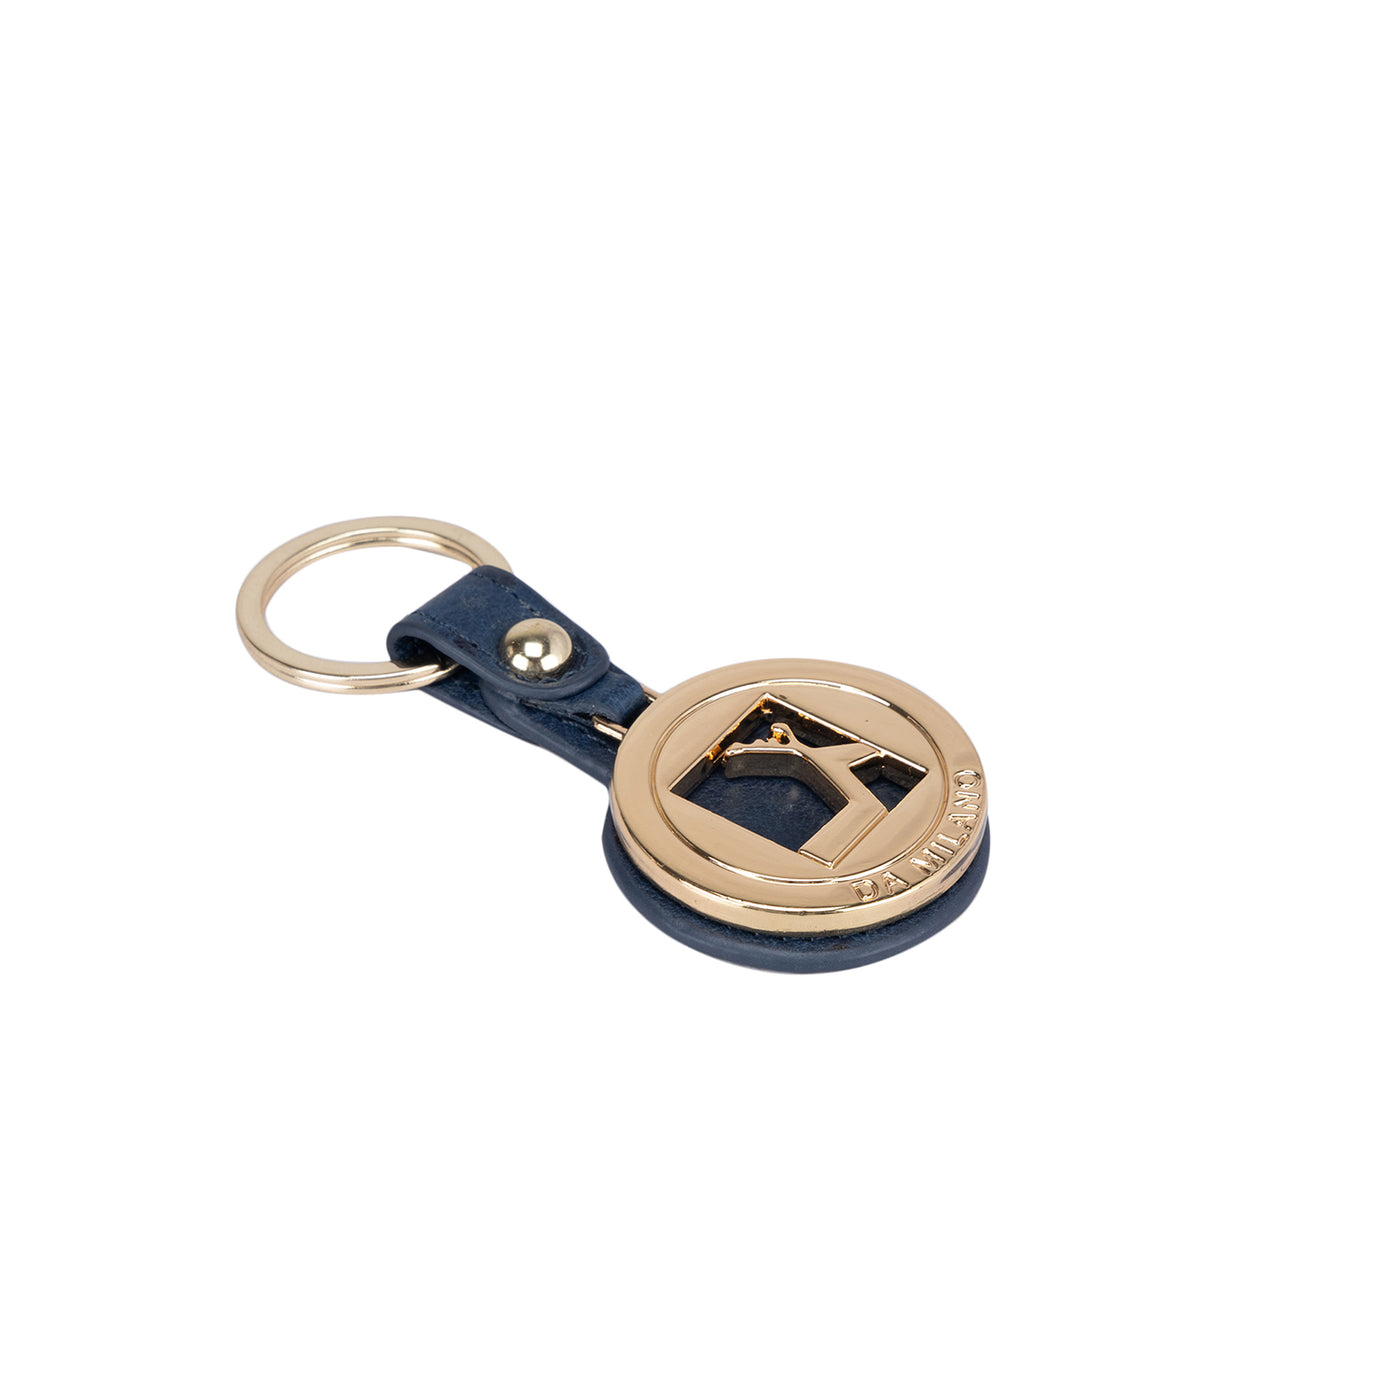 Ostrich Leather Key Chain - Navy Blue